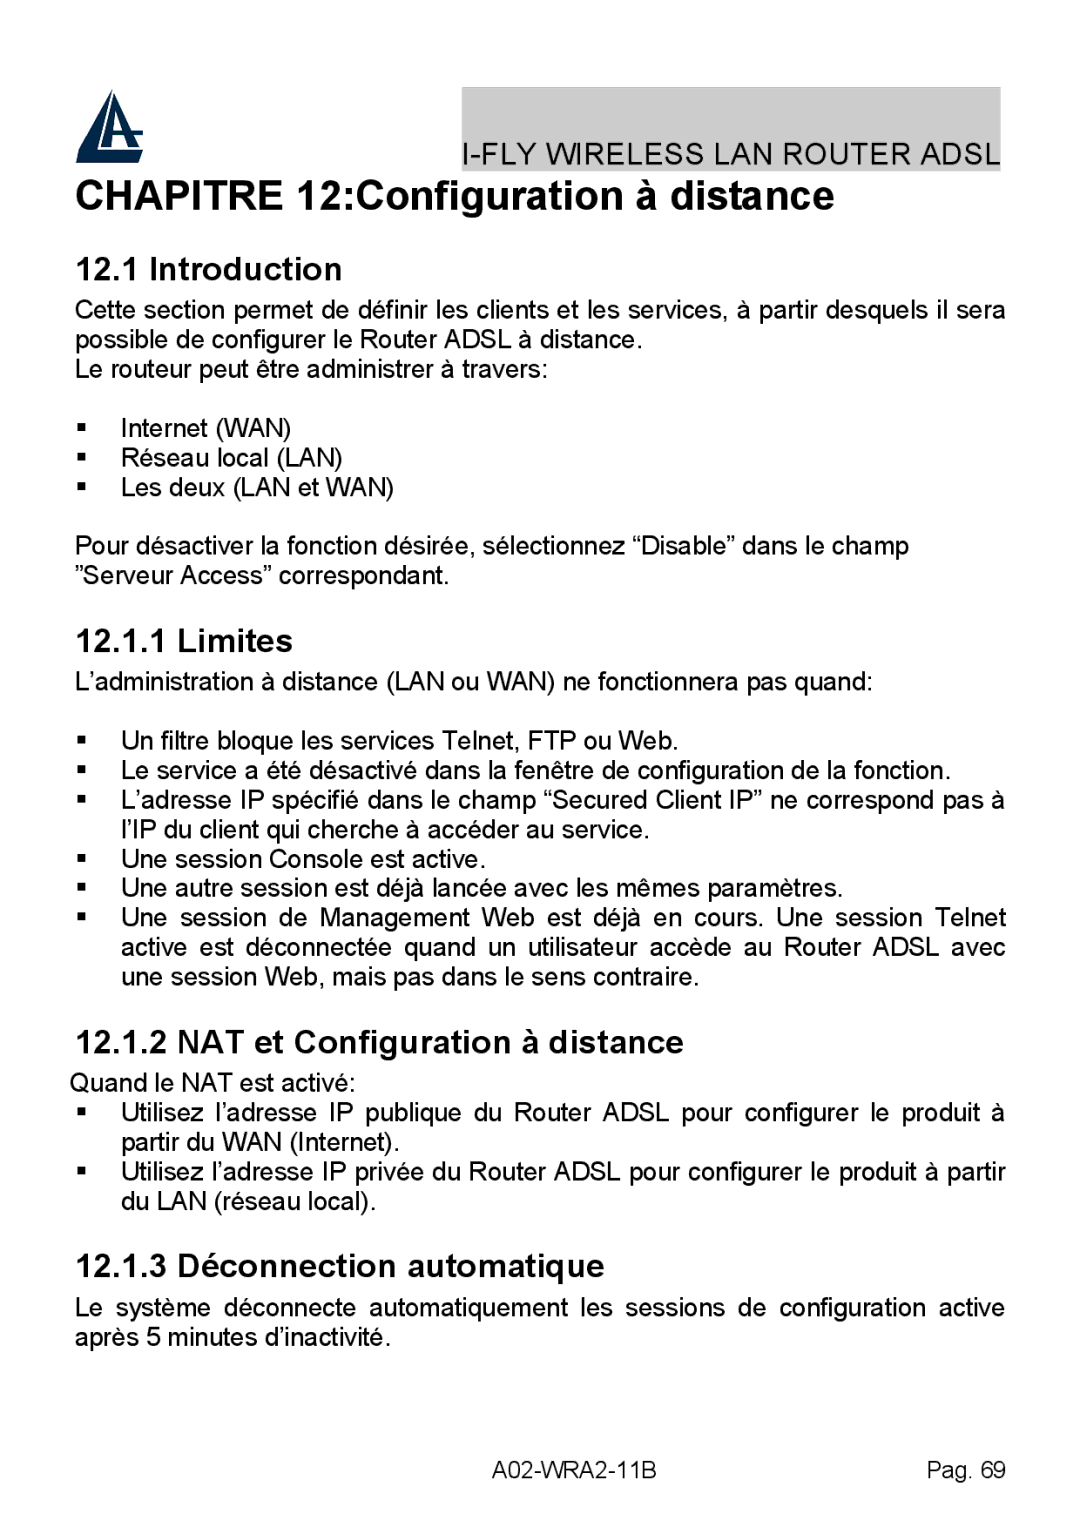 Bissell A02-WRA2-11B manual Chapitre 12Configuration à distance, Limites, NAT et Configuration à distance 